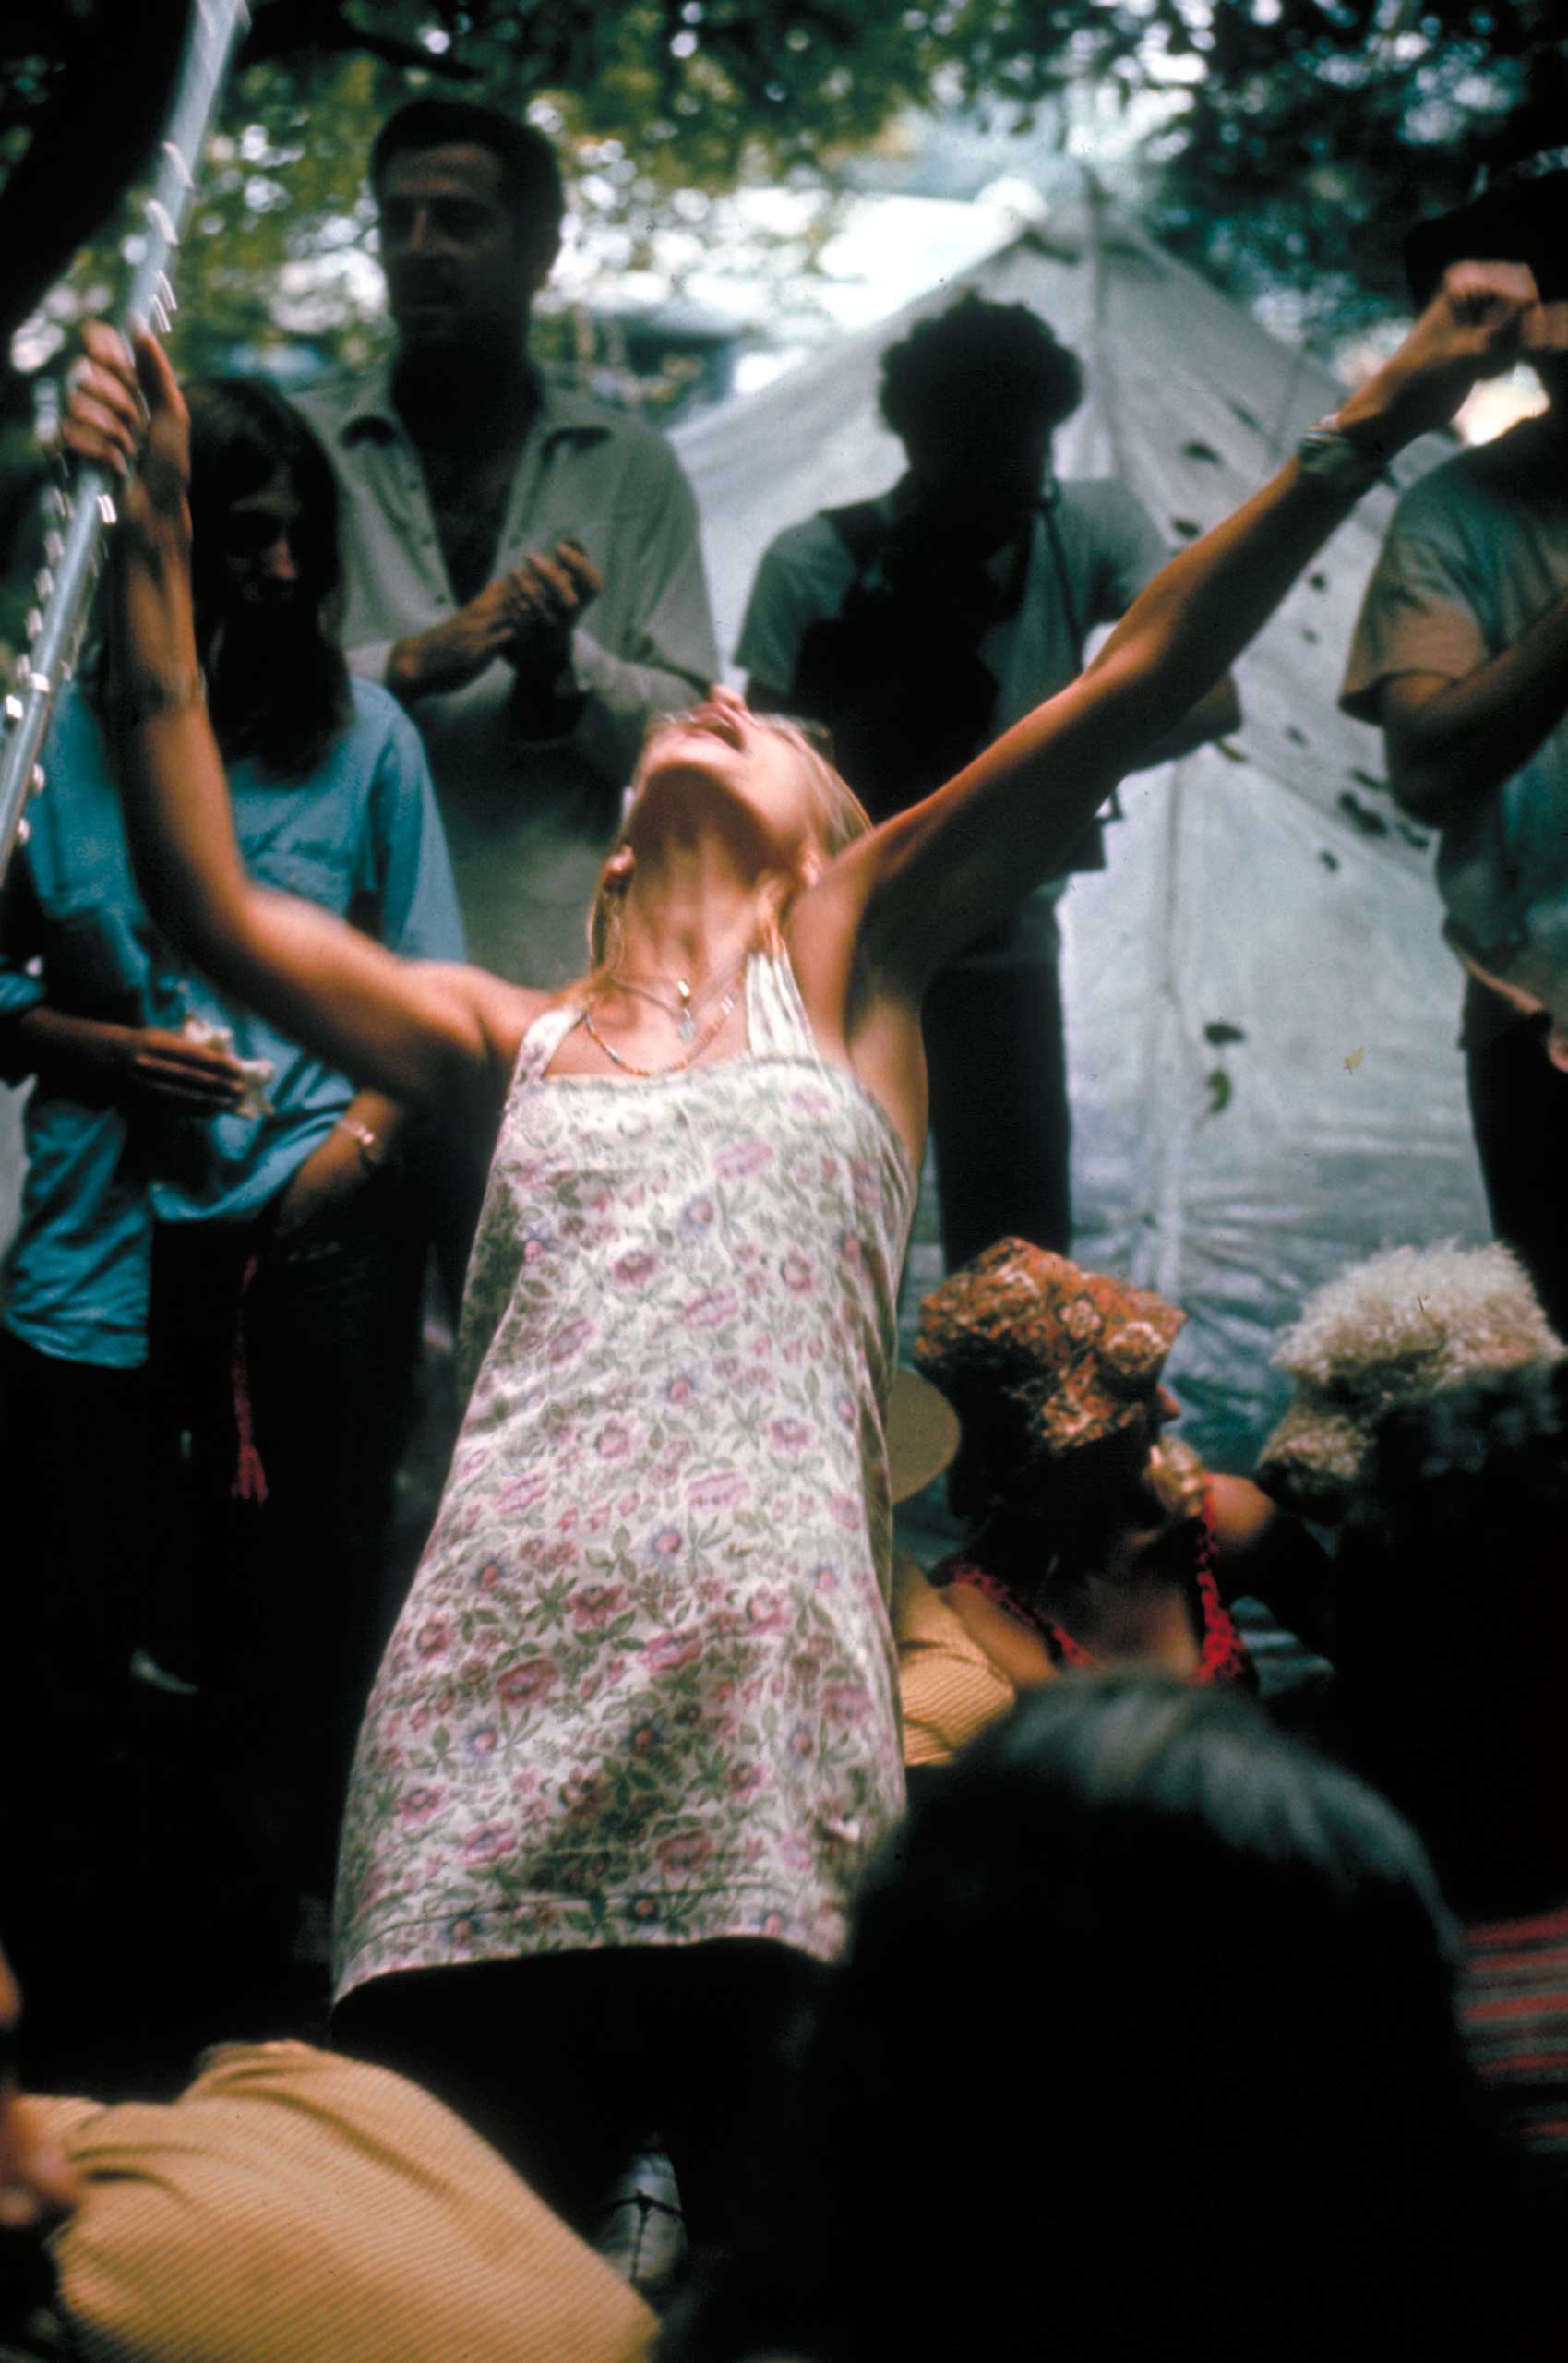 <b>Caption from LIFE.</b> "Overcome by the driving rhythm, a lady flutist abandons herself to dance during an impromptu amateur performance in the woods." Woodstock, 1969. (Bill Eppridge&mdash;Time &amp; Life Pictures/Getty Images)